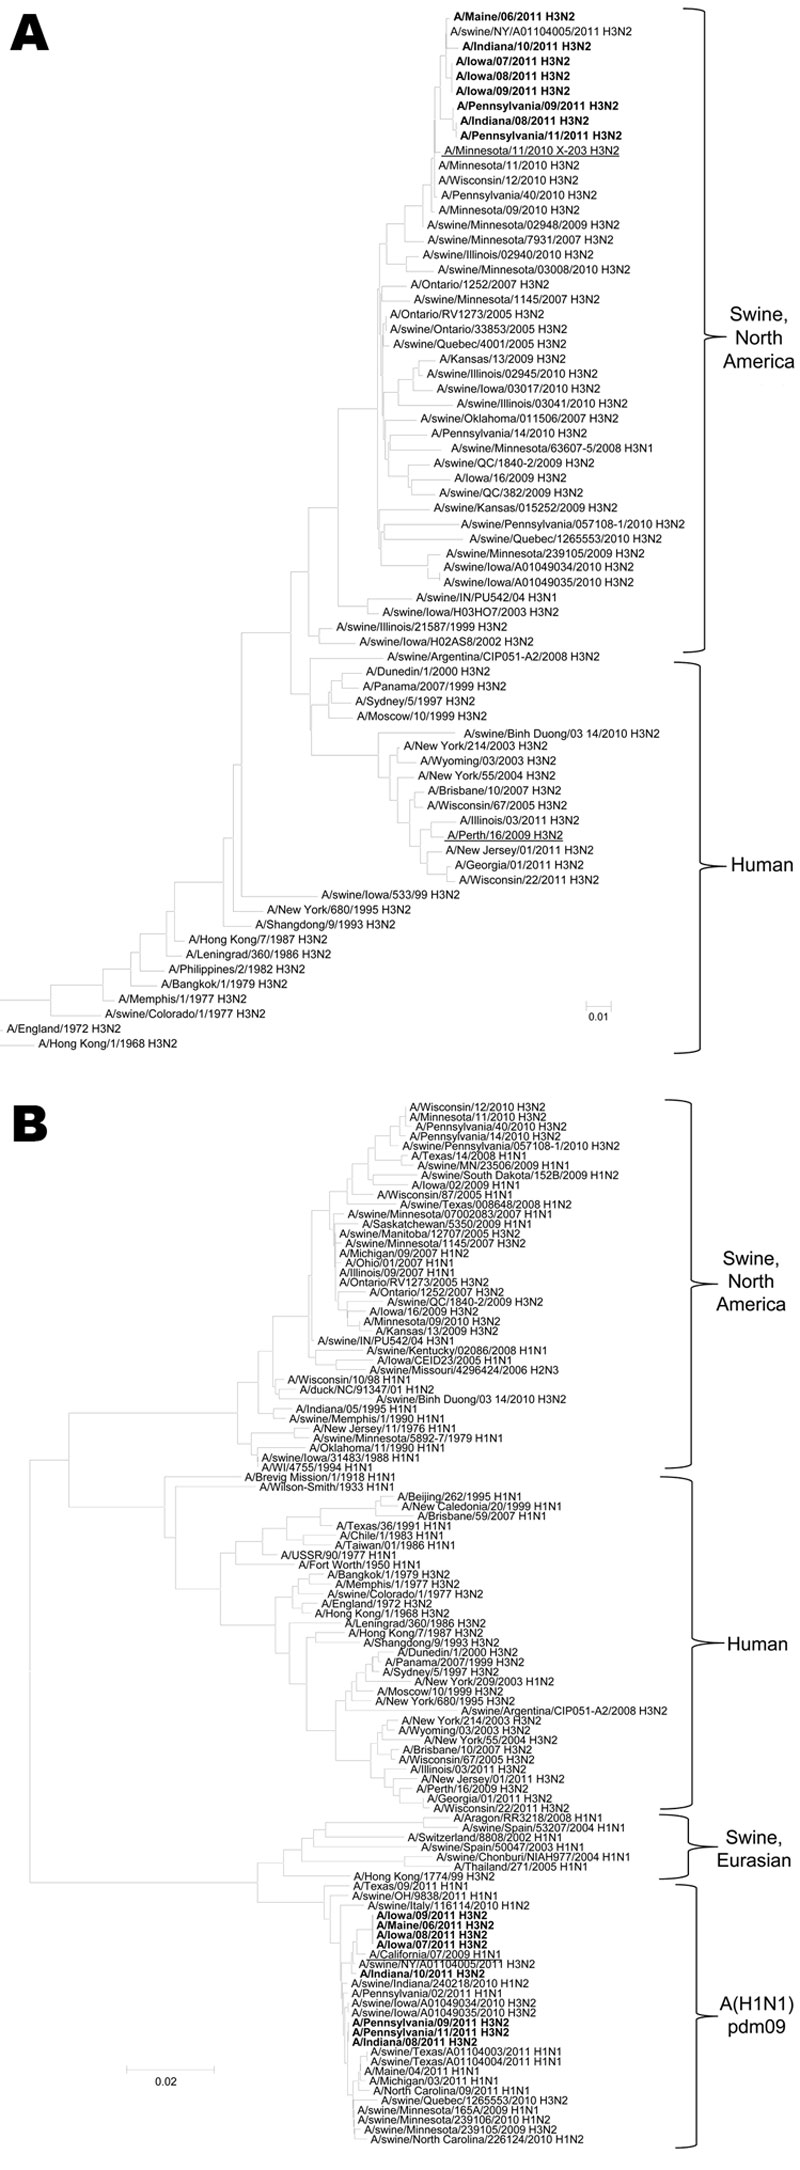 Phylogenetic analysis of the A) hemagglutinin and B) matrix genes of influenza A(H3N2)v viruses. Sequences obtained from human A(H3N2)v isolates in the United States during 2011 are shown in boldface; sequences of proposed vaccine virus are underlined. Scale bars indicate number of base substitutions per site.